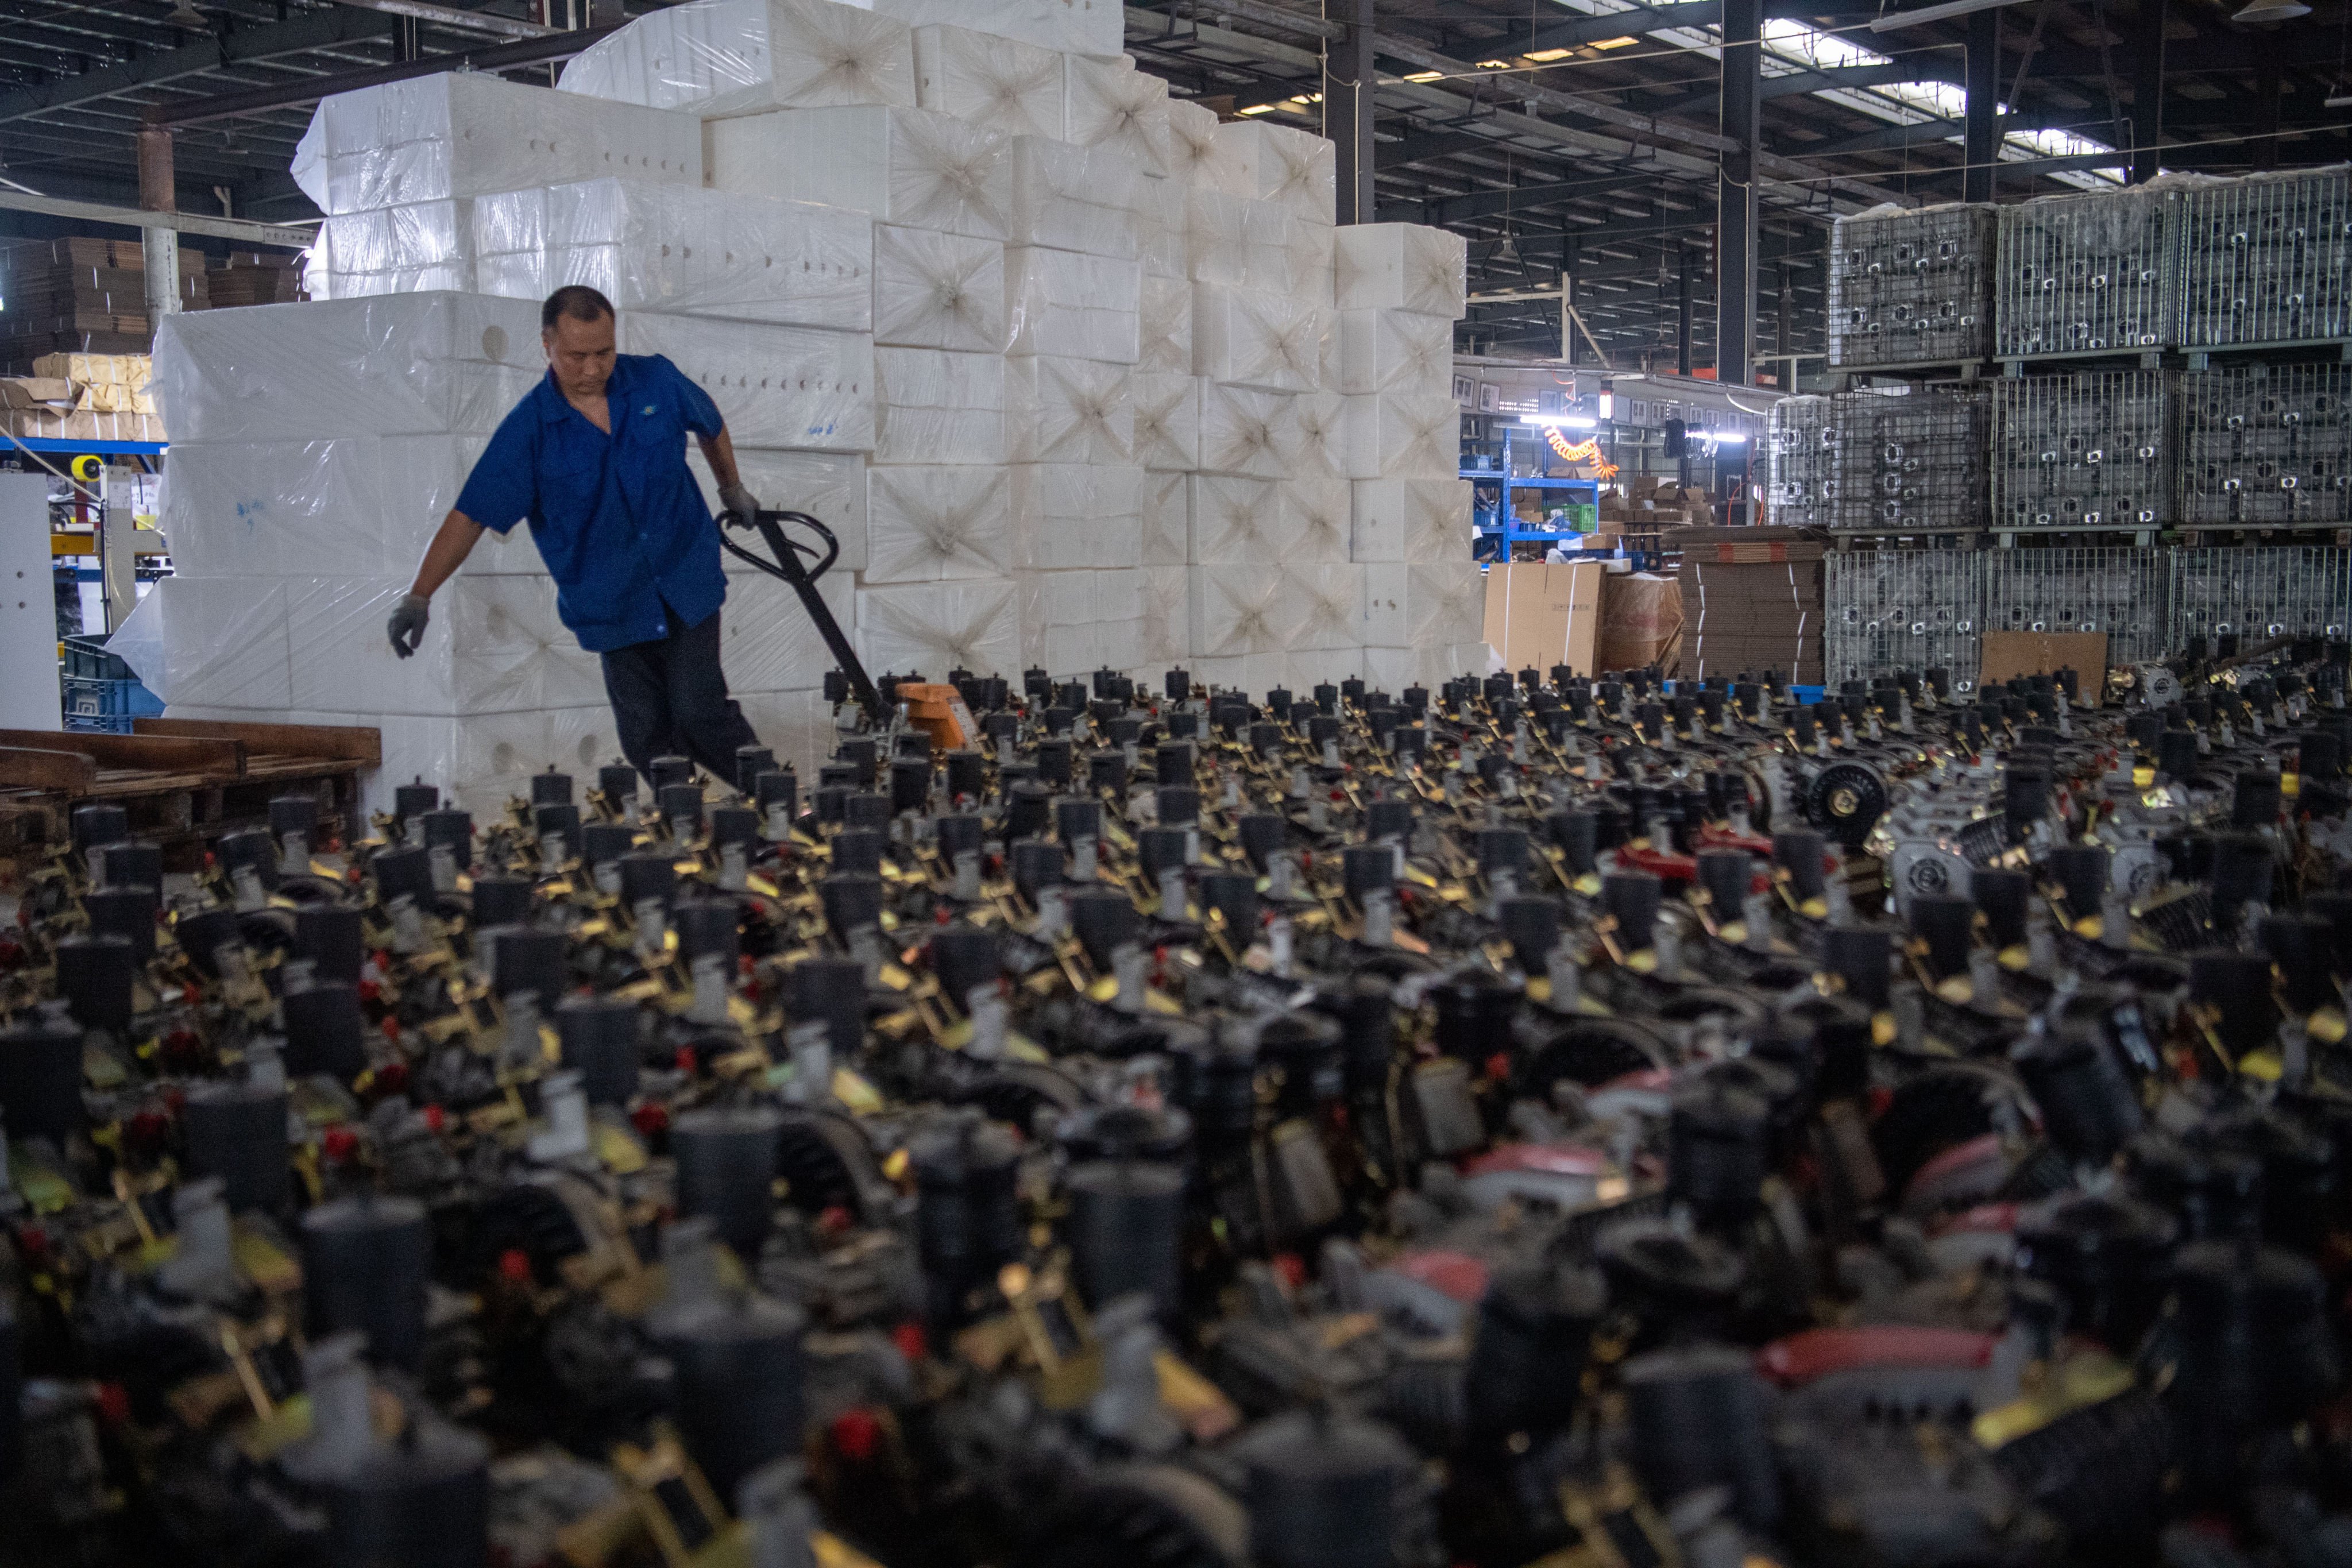 A man works at a machinery factory in southwest China’s Chongqing municipality on May 27. Inland cities such as Chongqing, Wuhan and Xian will be central to maintaining China’s growth momentum as the government tries to bring economic development to regions outside the prosperous east coast. Photo: Xinhua